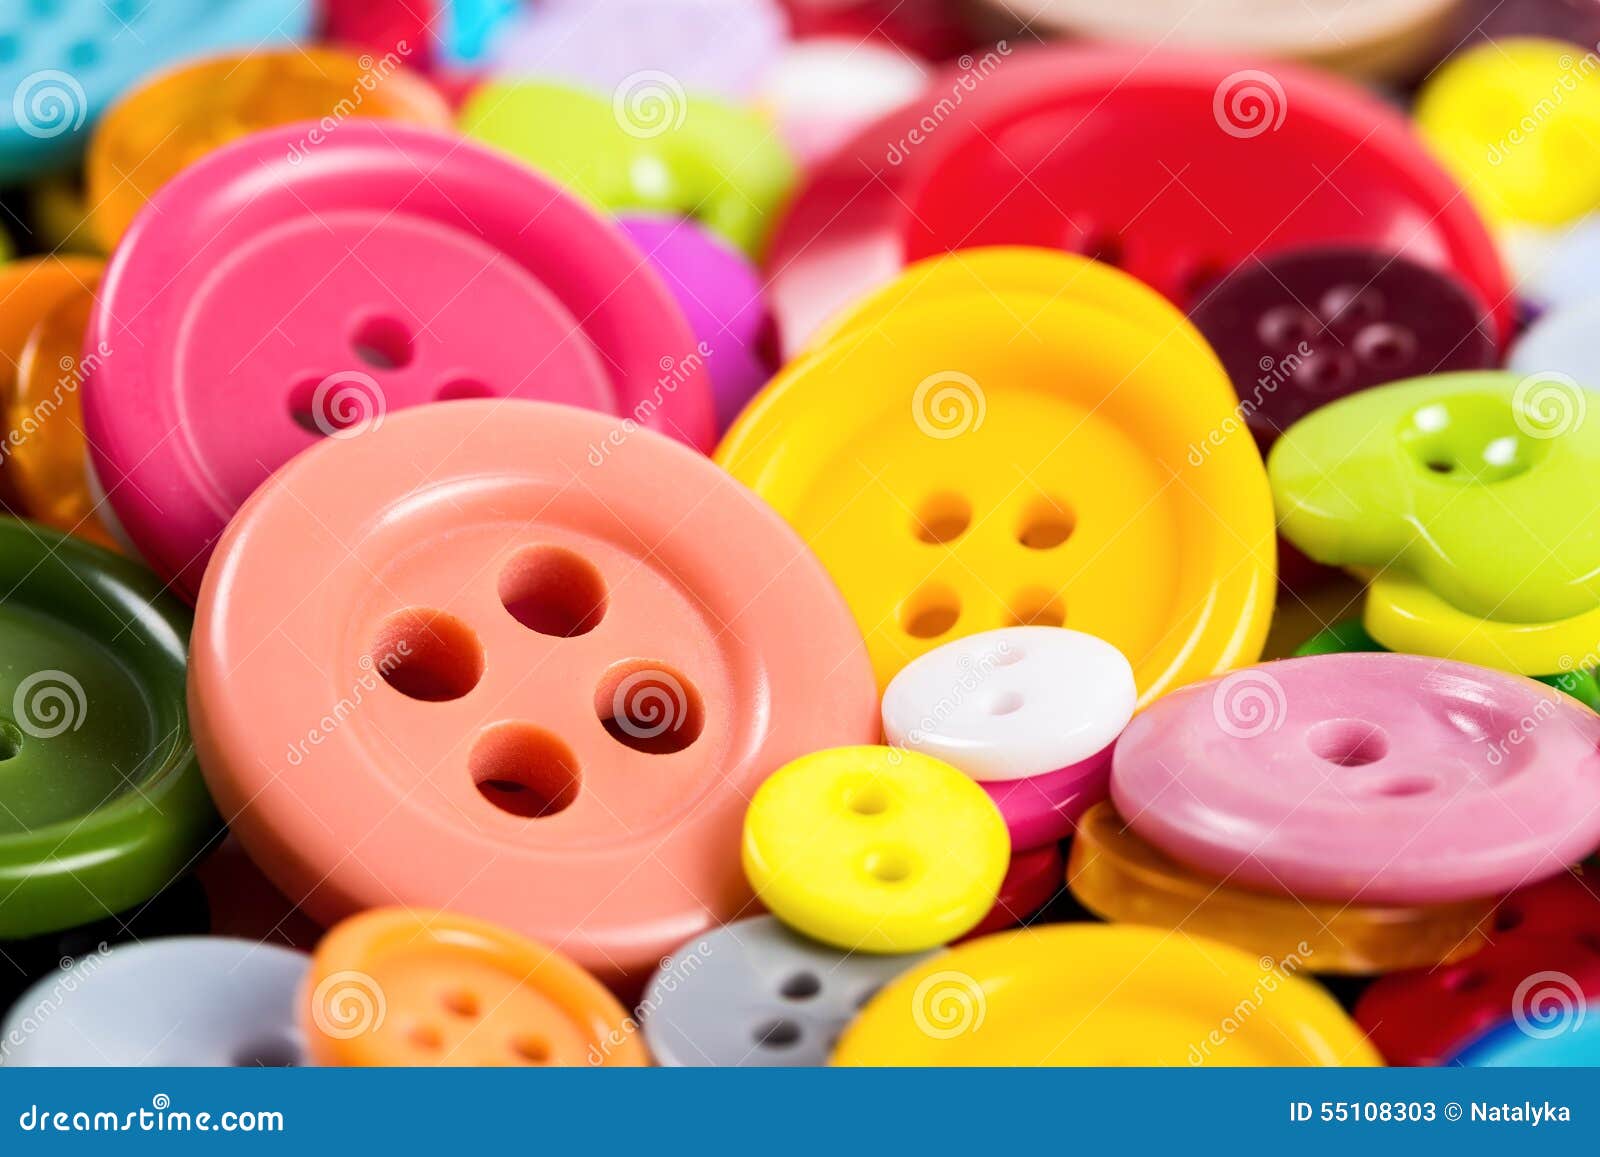 Background from of colorful buttons of different shapes, close-up.